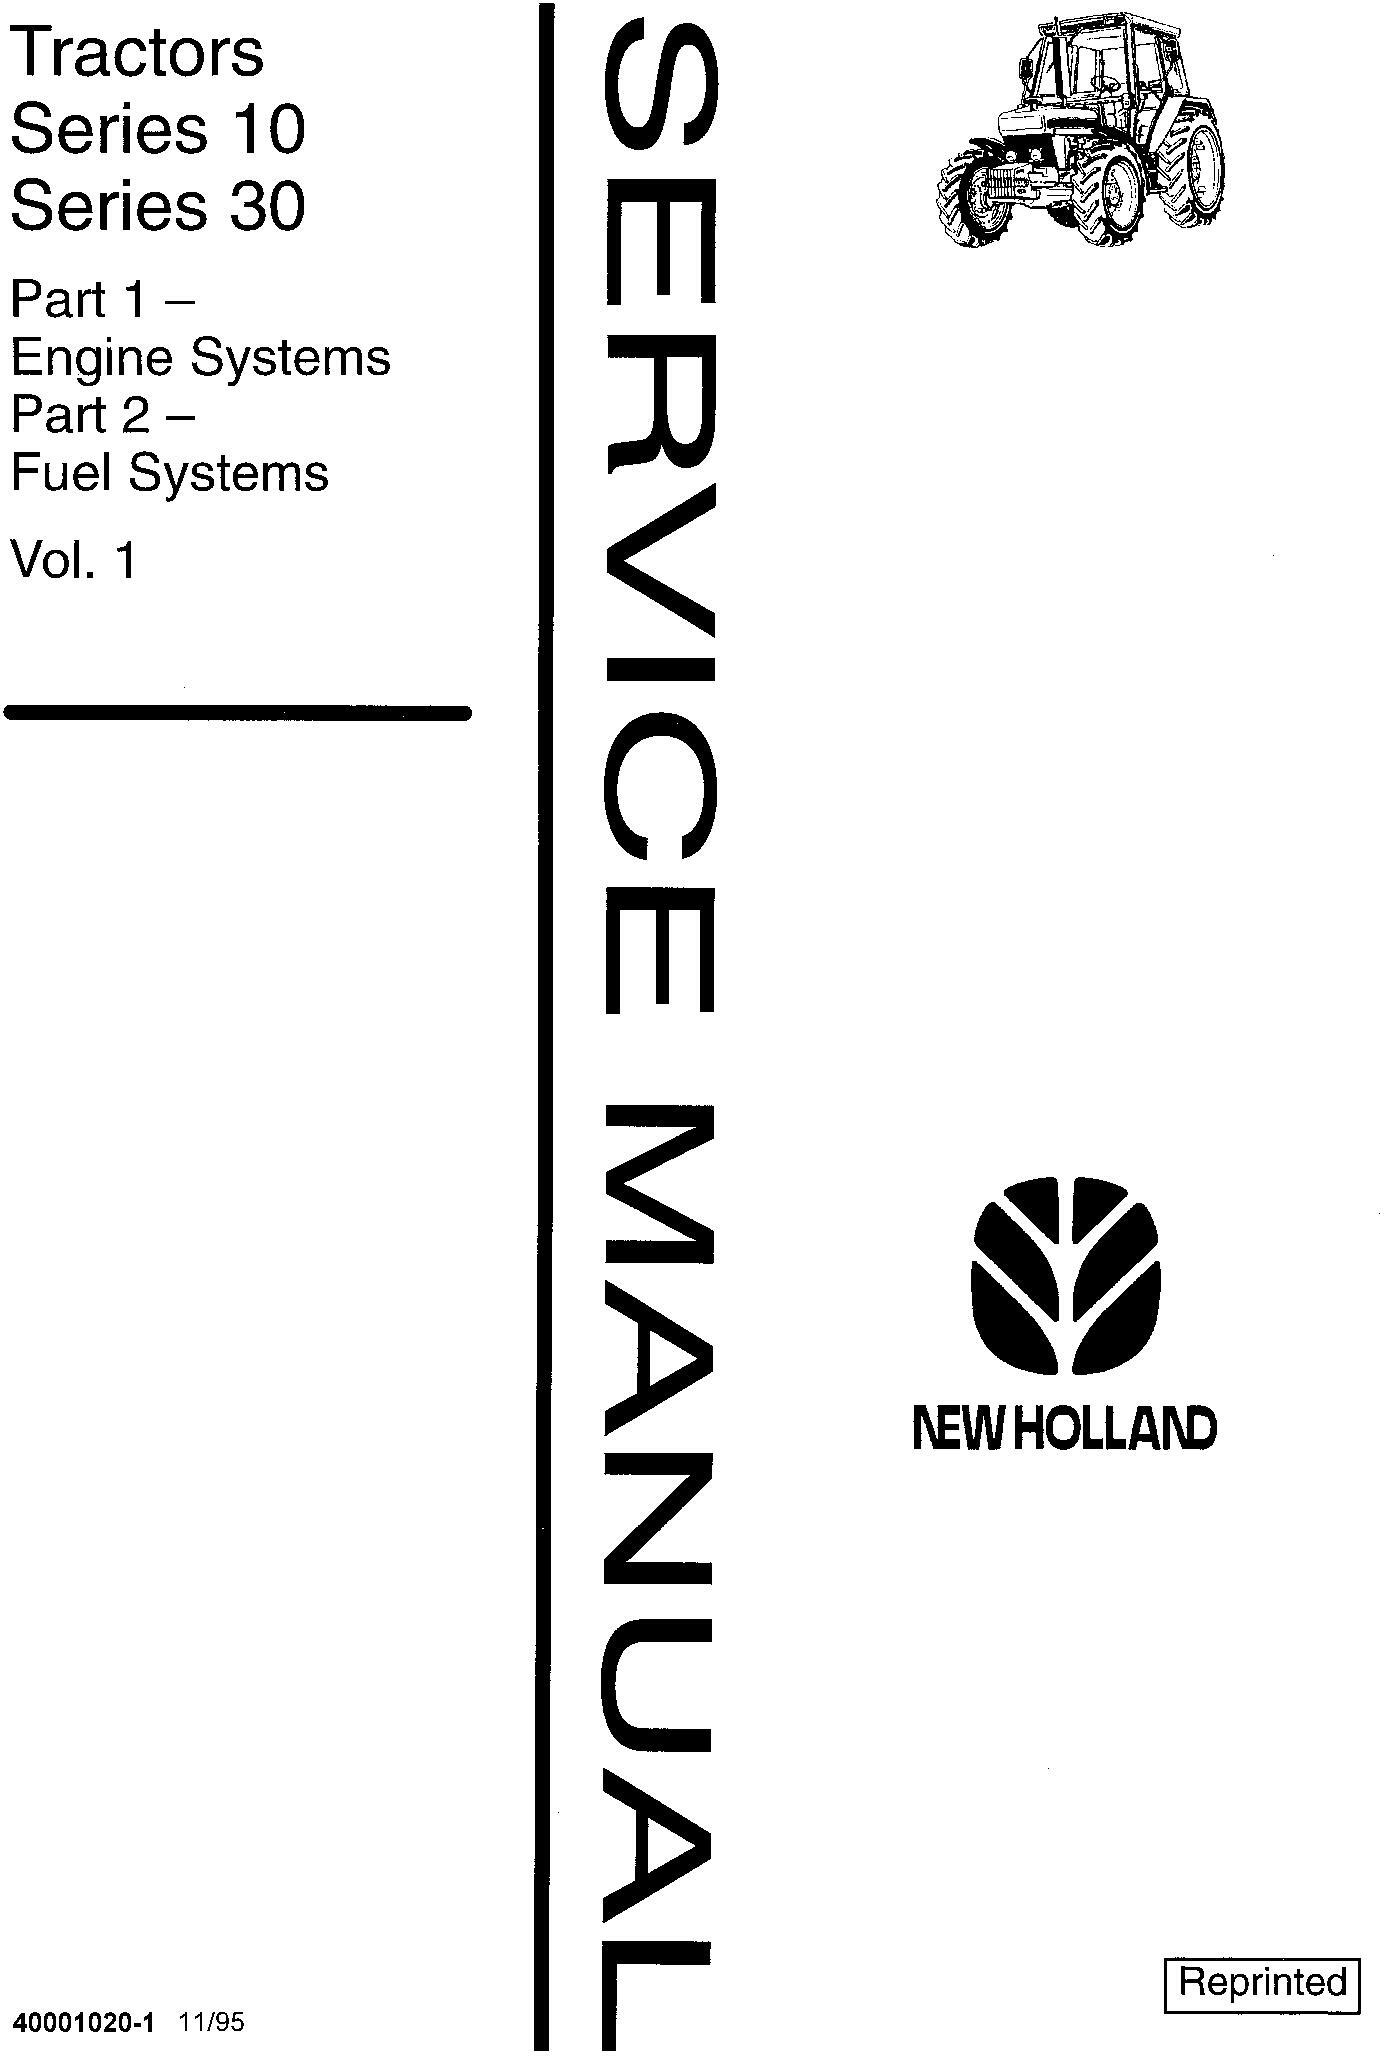 Ford , New Holland 2310-8210 (xx10 Series), 3230, 3430, 3930, 4630, 4830, 5030 Tractor Service Manual - 19372